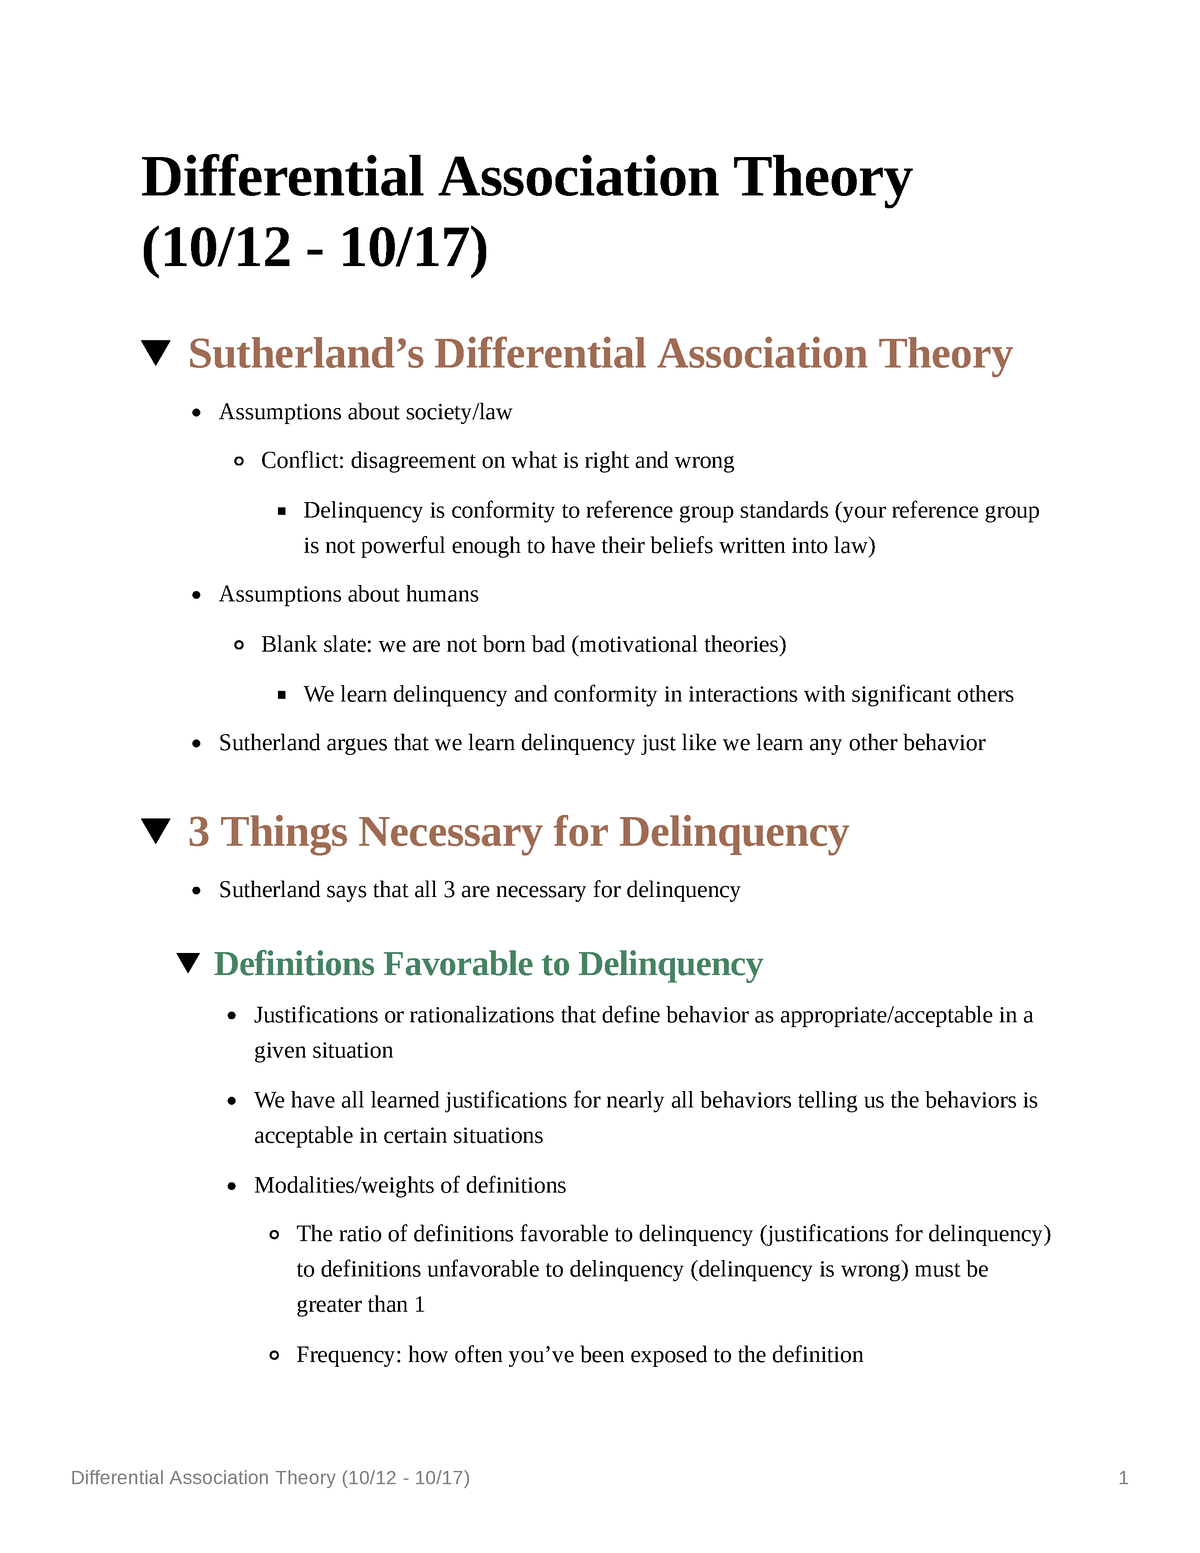 differential association theory case study